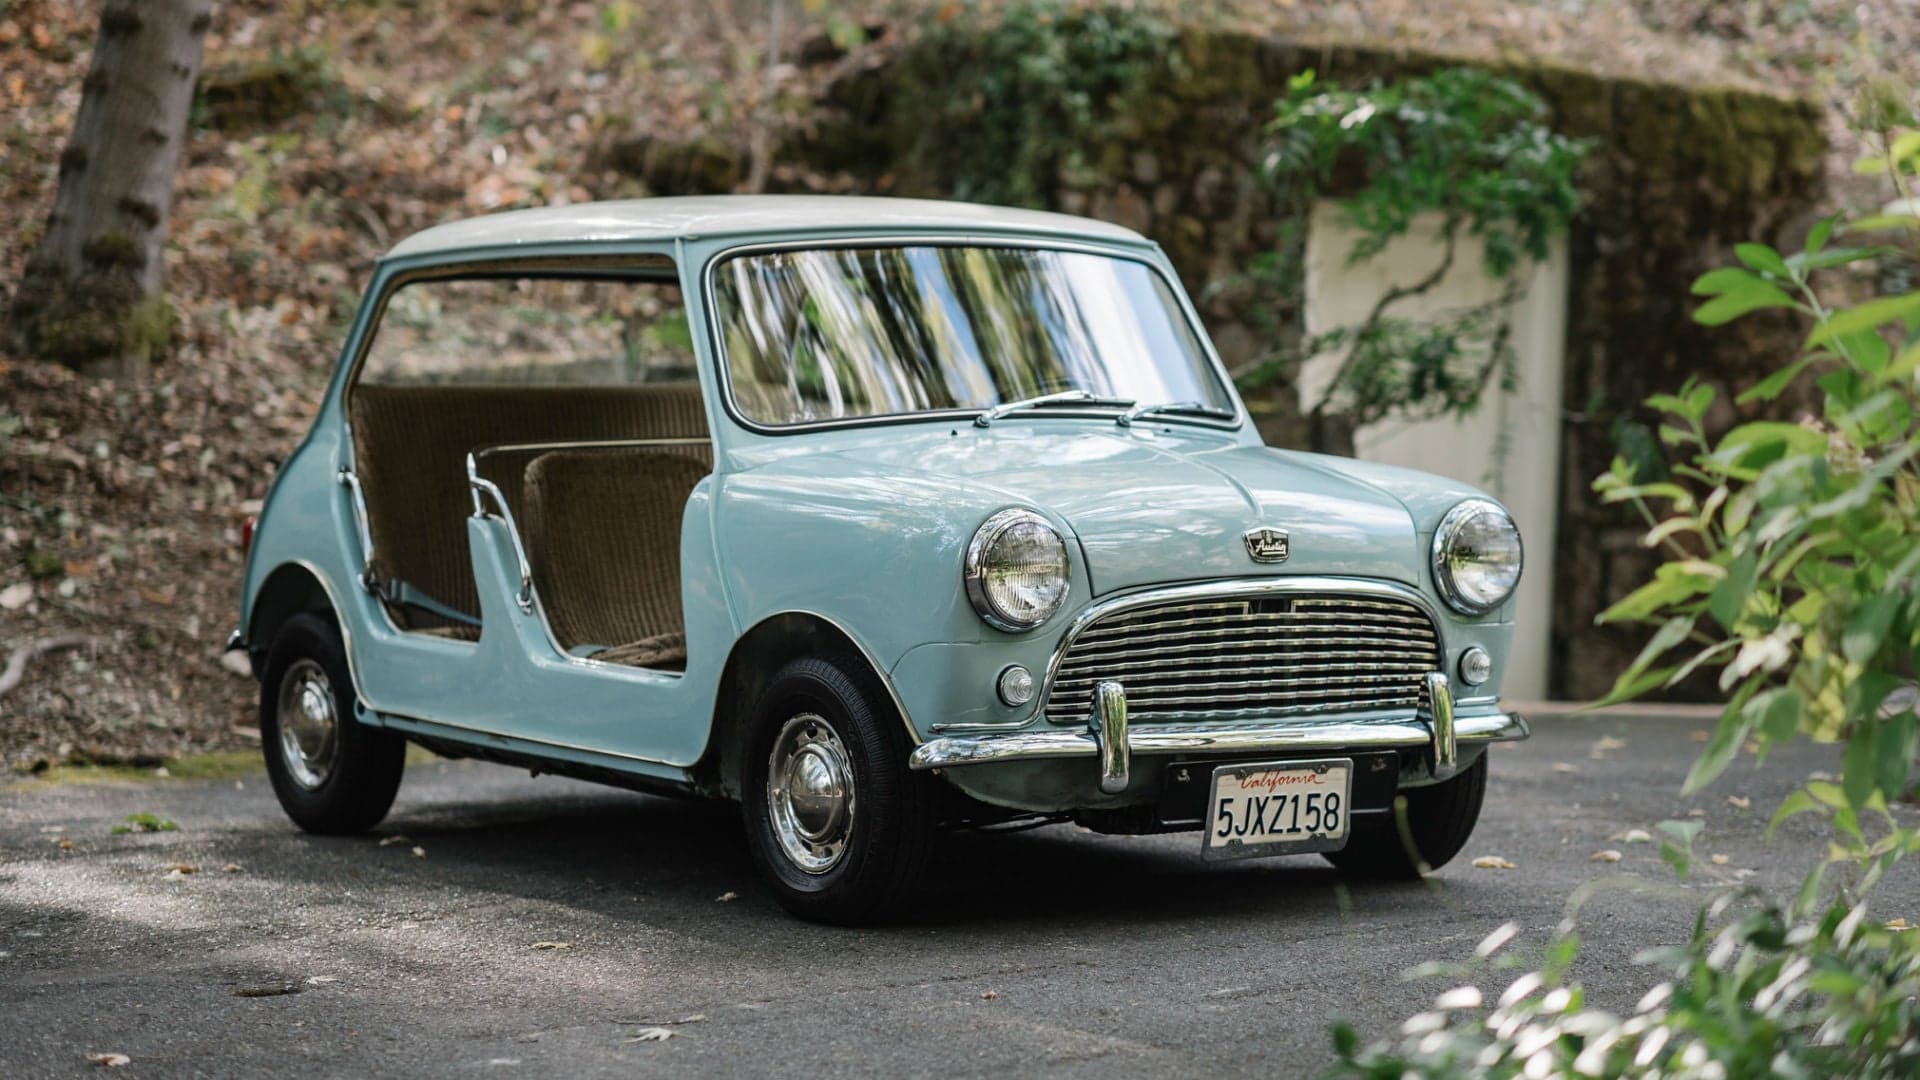 Immensely Rare 1962 Austin Mini Beach Car Sells for Astonishing $230,000 at Auction